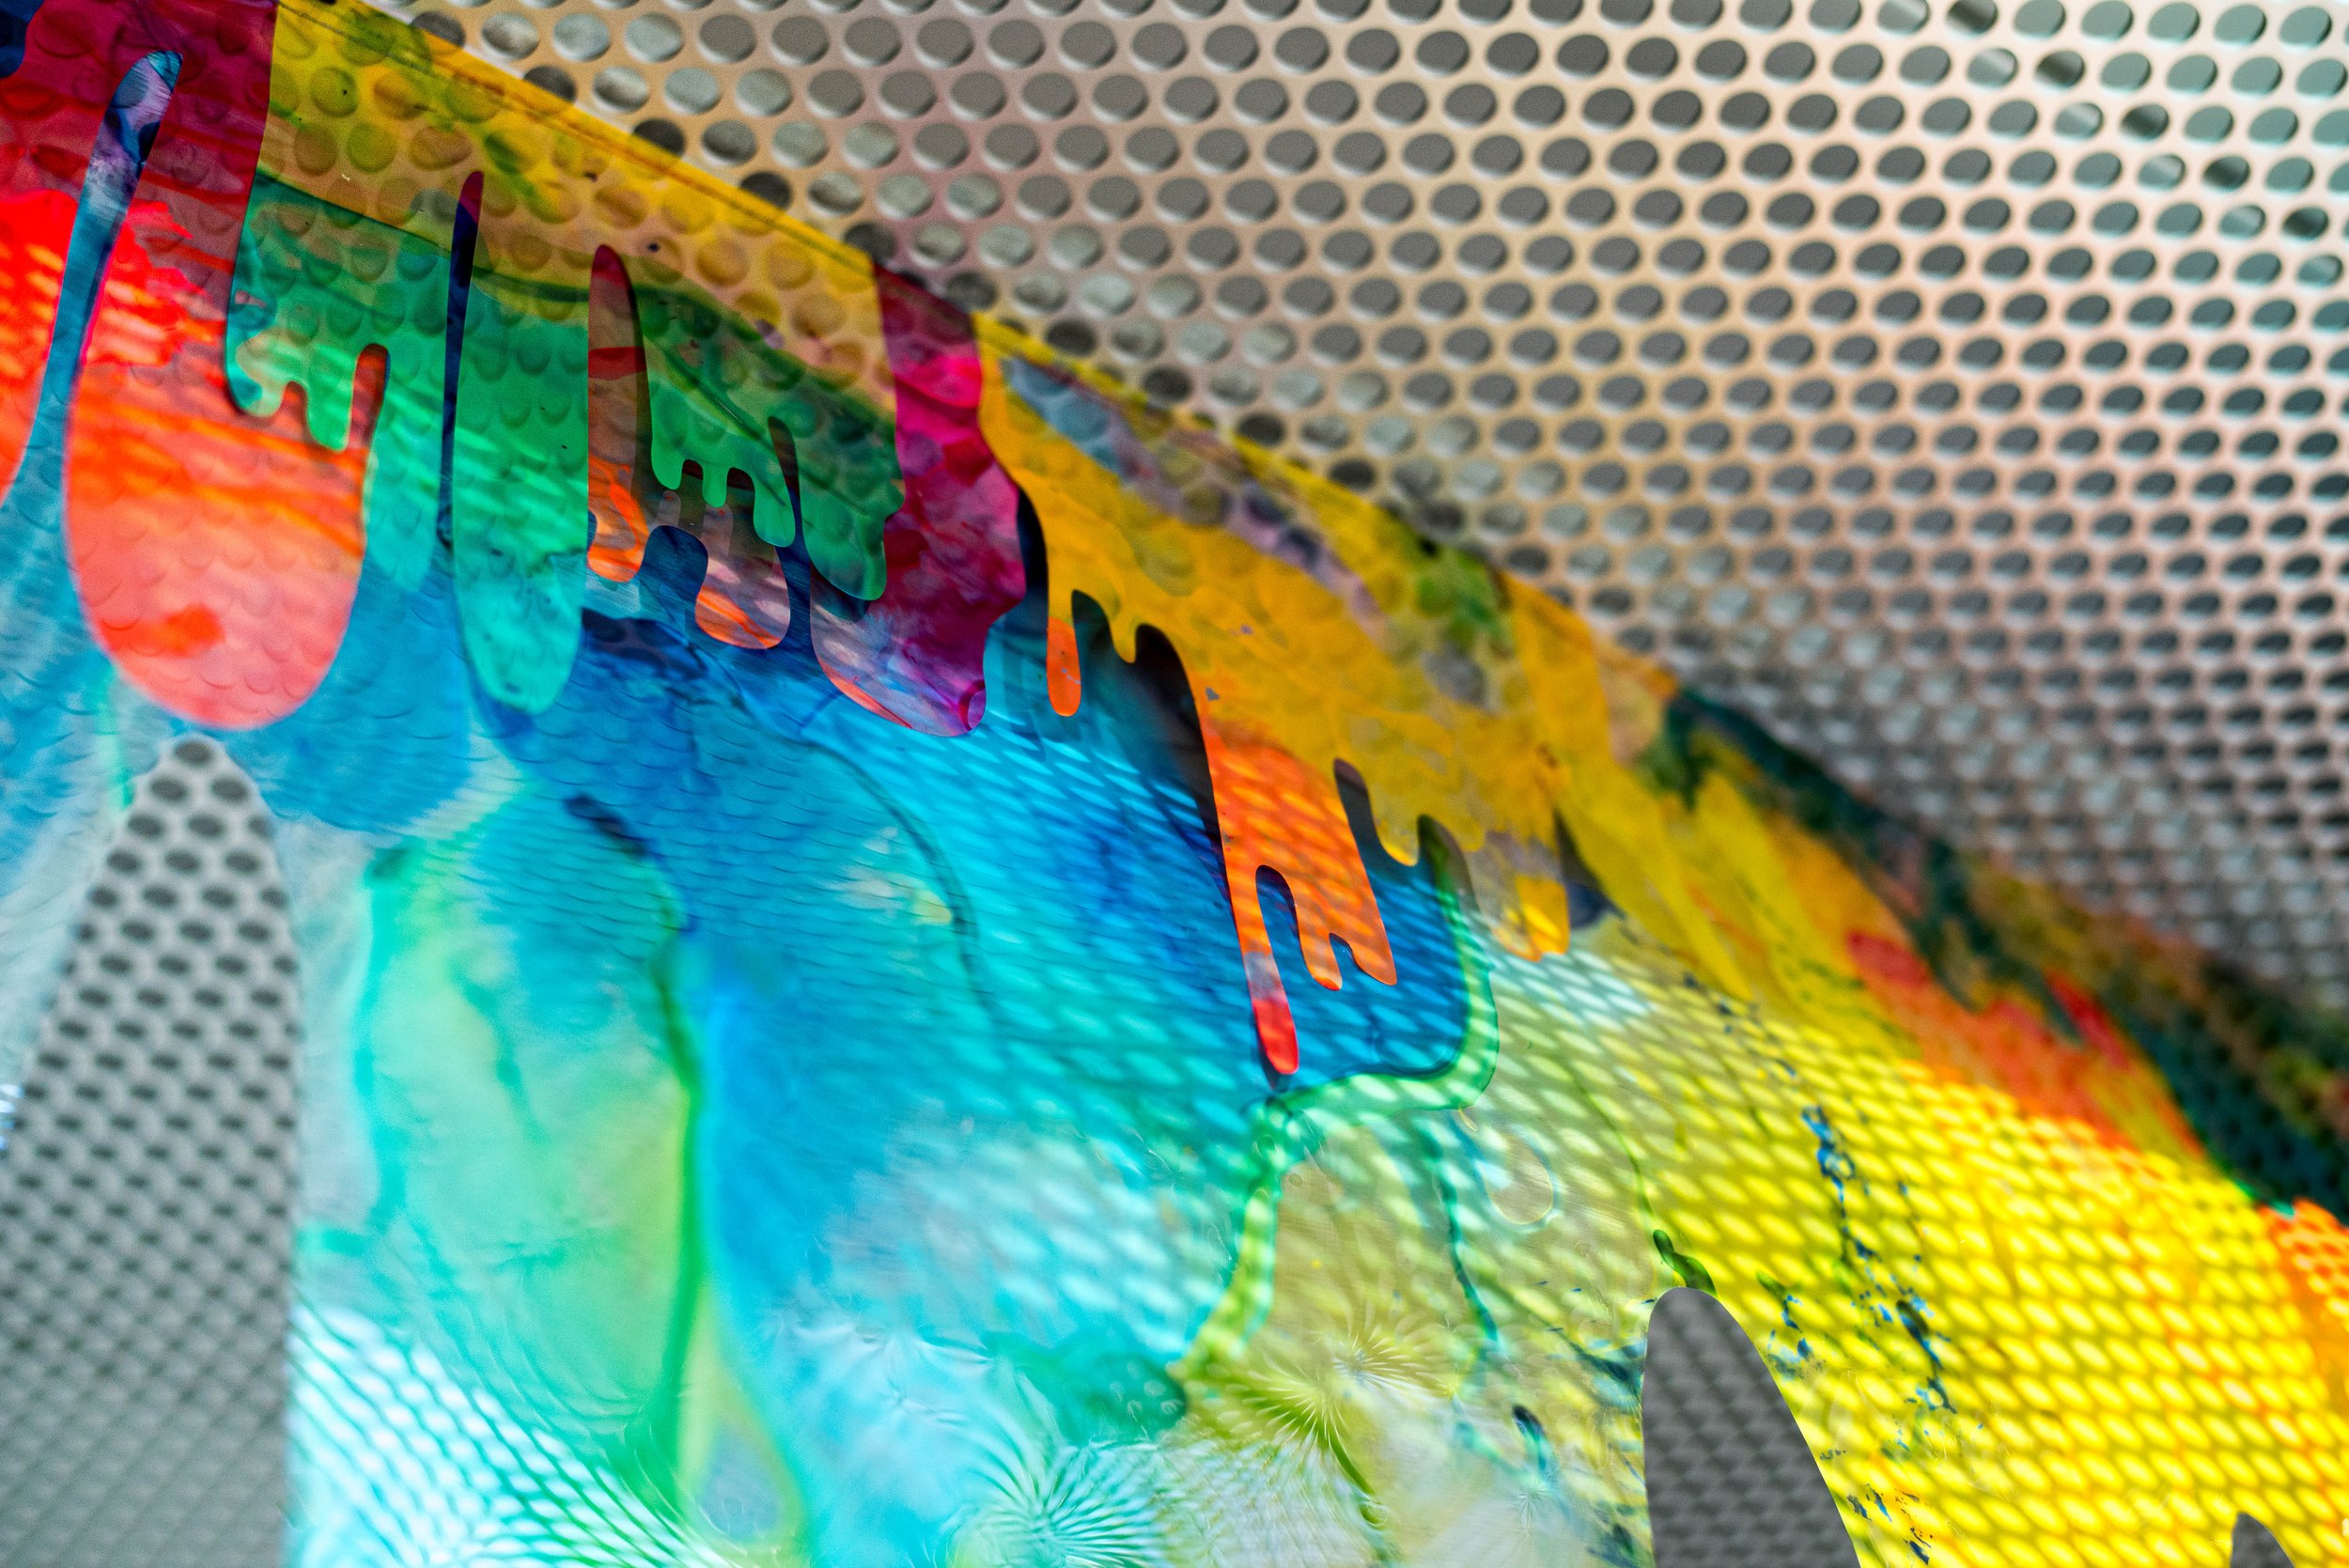  Colorful installation featuring acrylic on mylar by Jane Cheek at Pullen Arts Center, Raleigh NC 